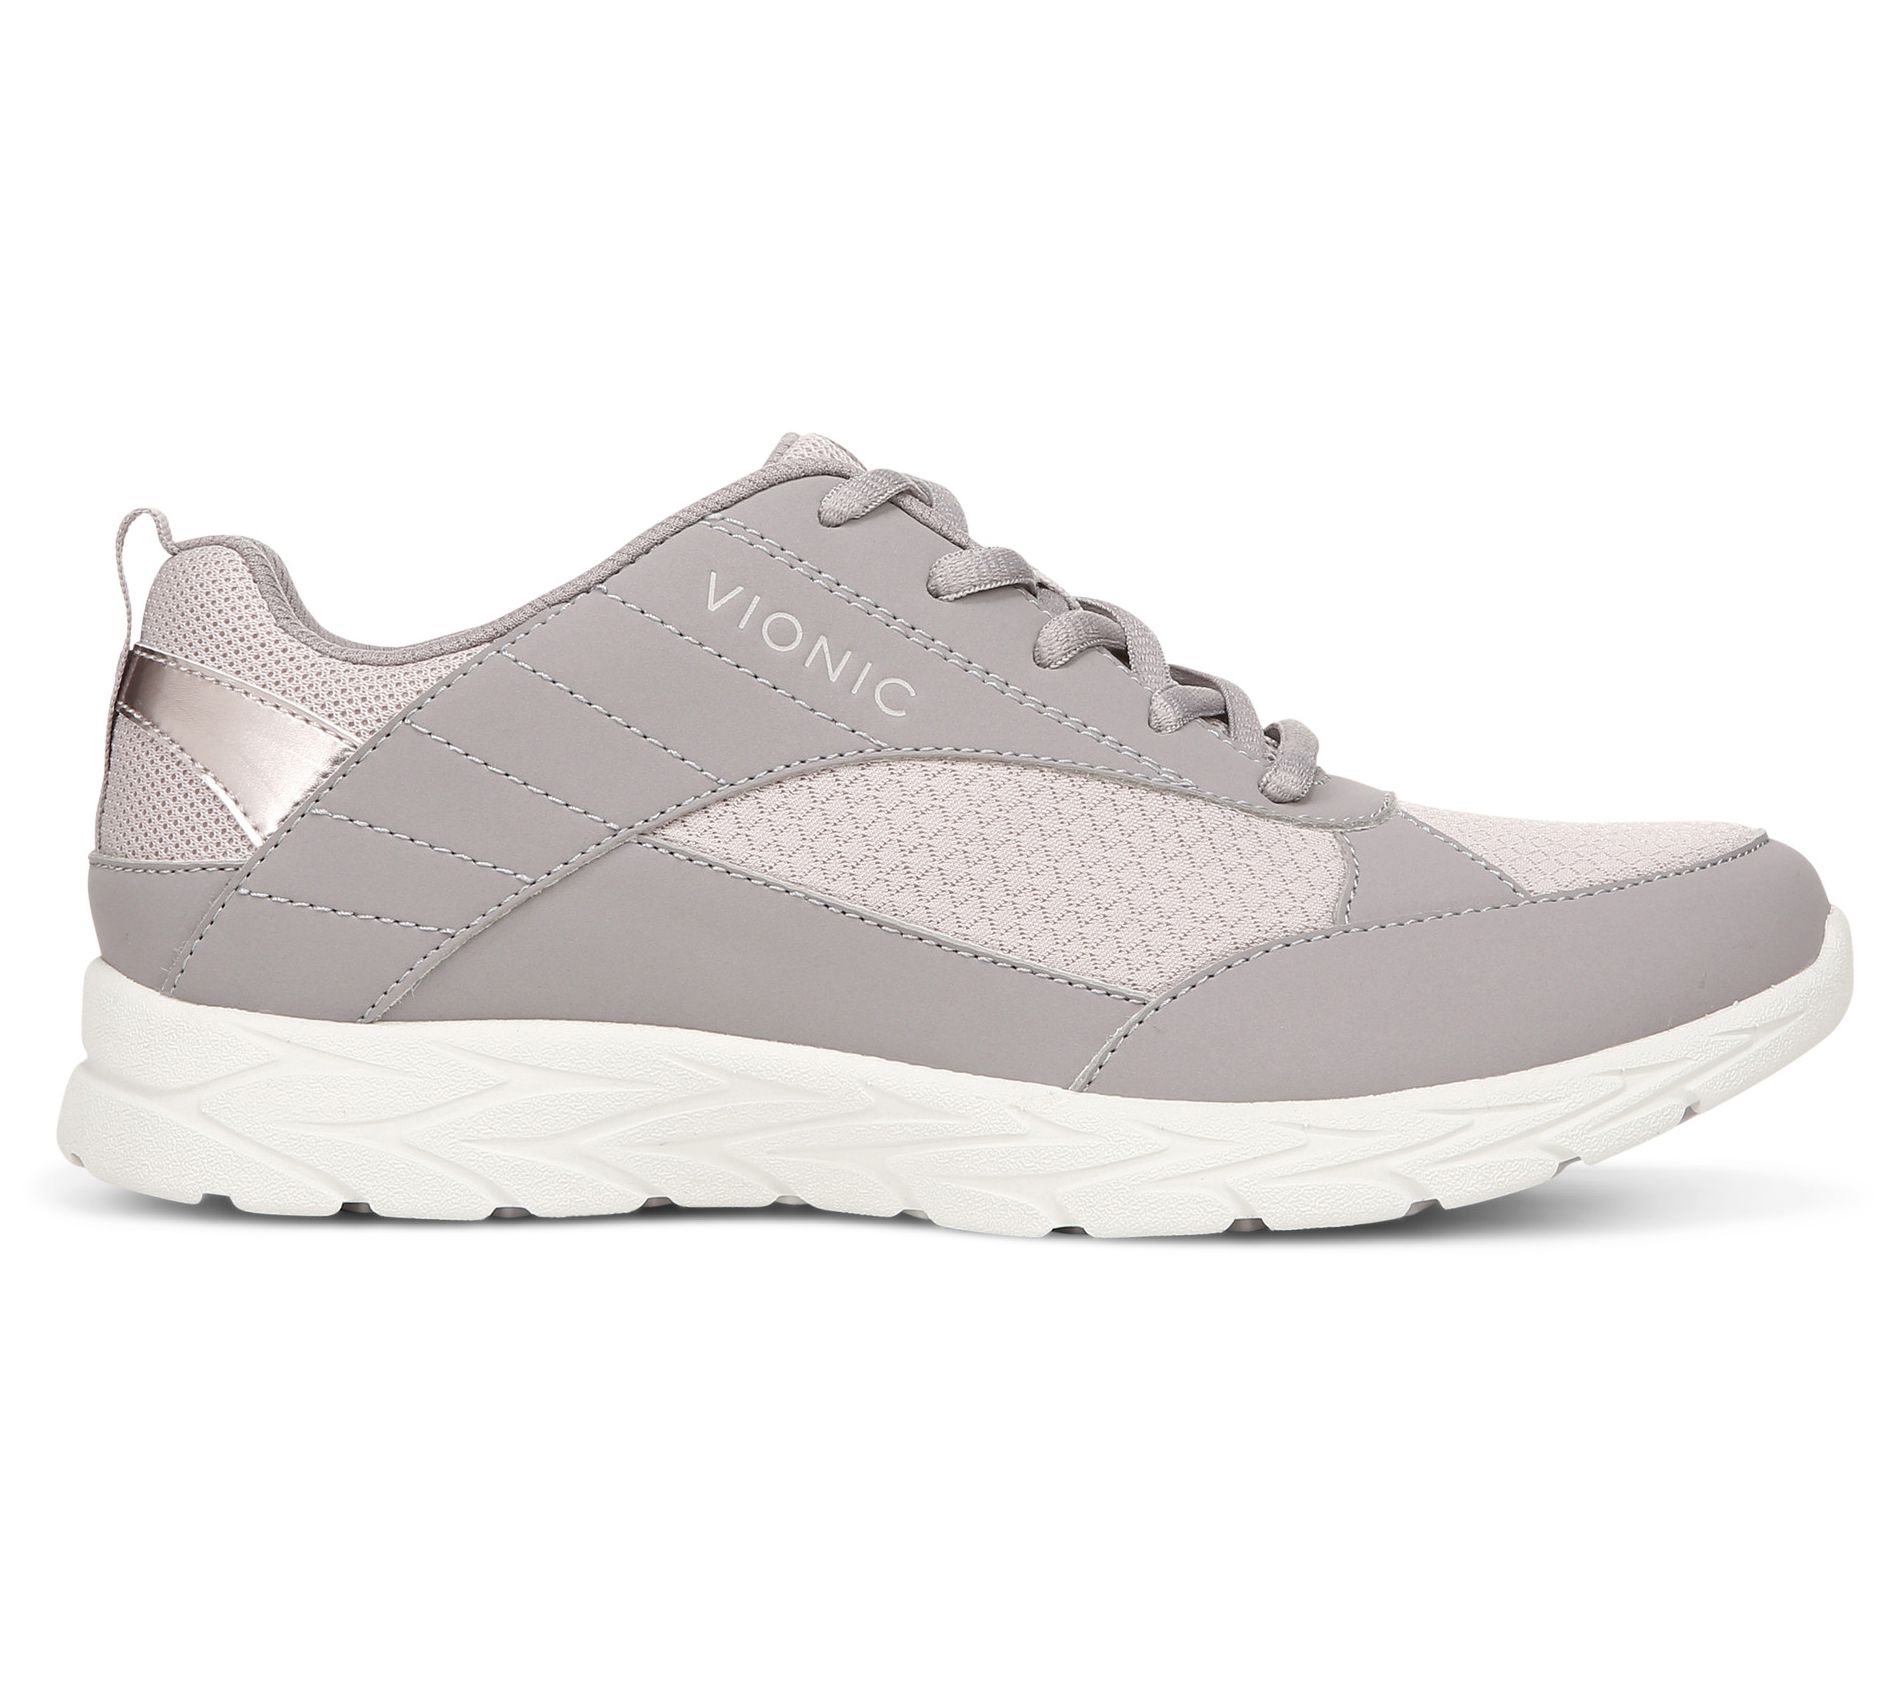 Vionic Lace-Up Athletic Sneakers - Lumina 